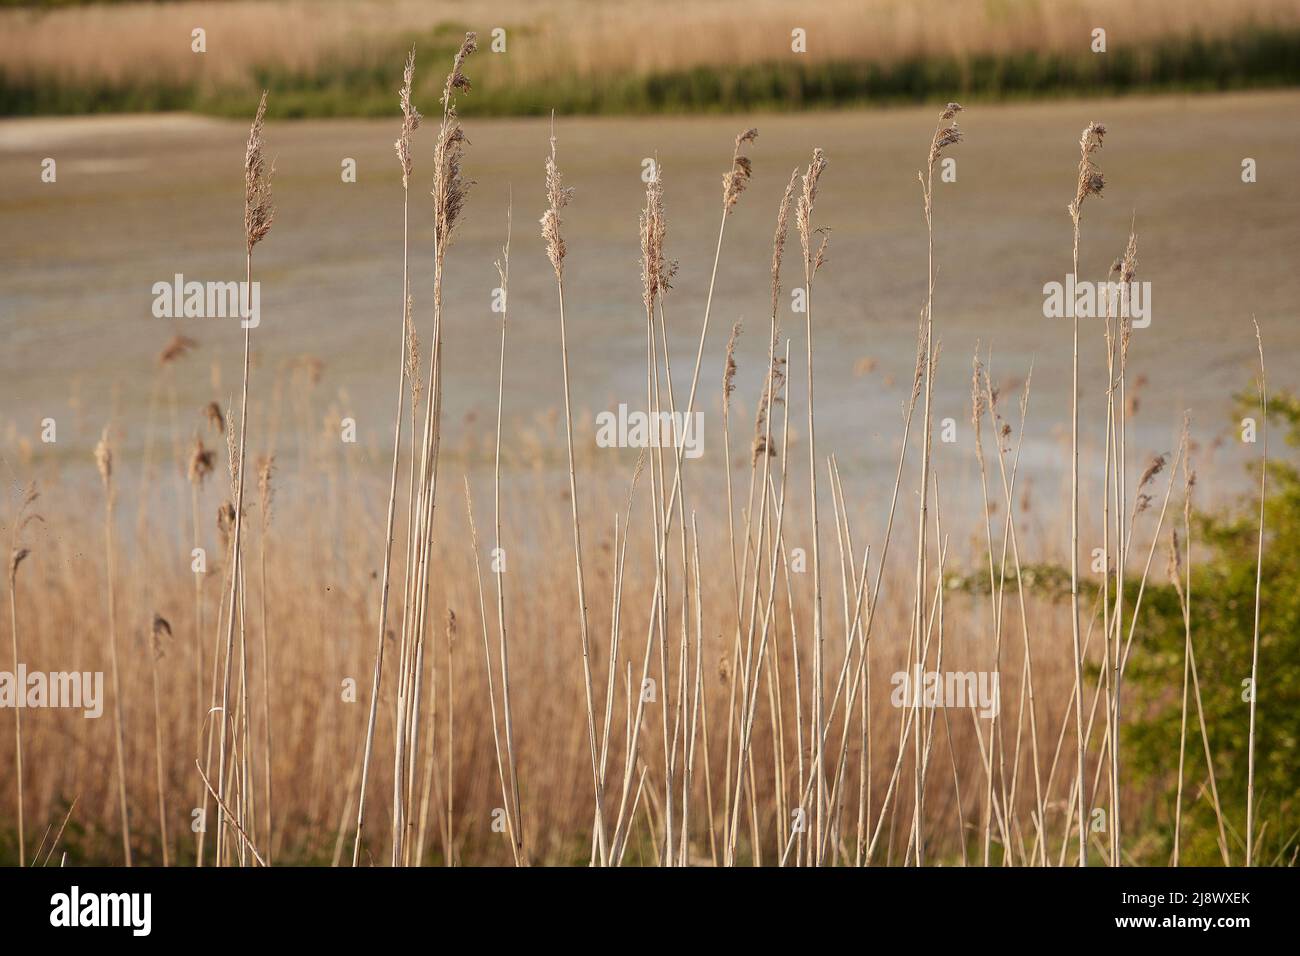 Close up of tall dried grass seen in natural light. Stock Photo